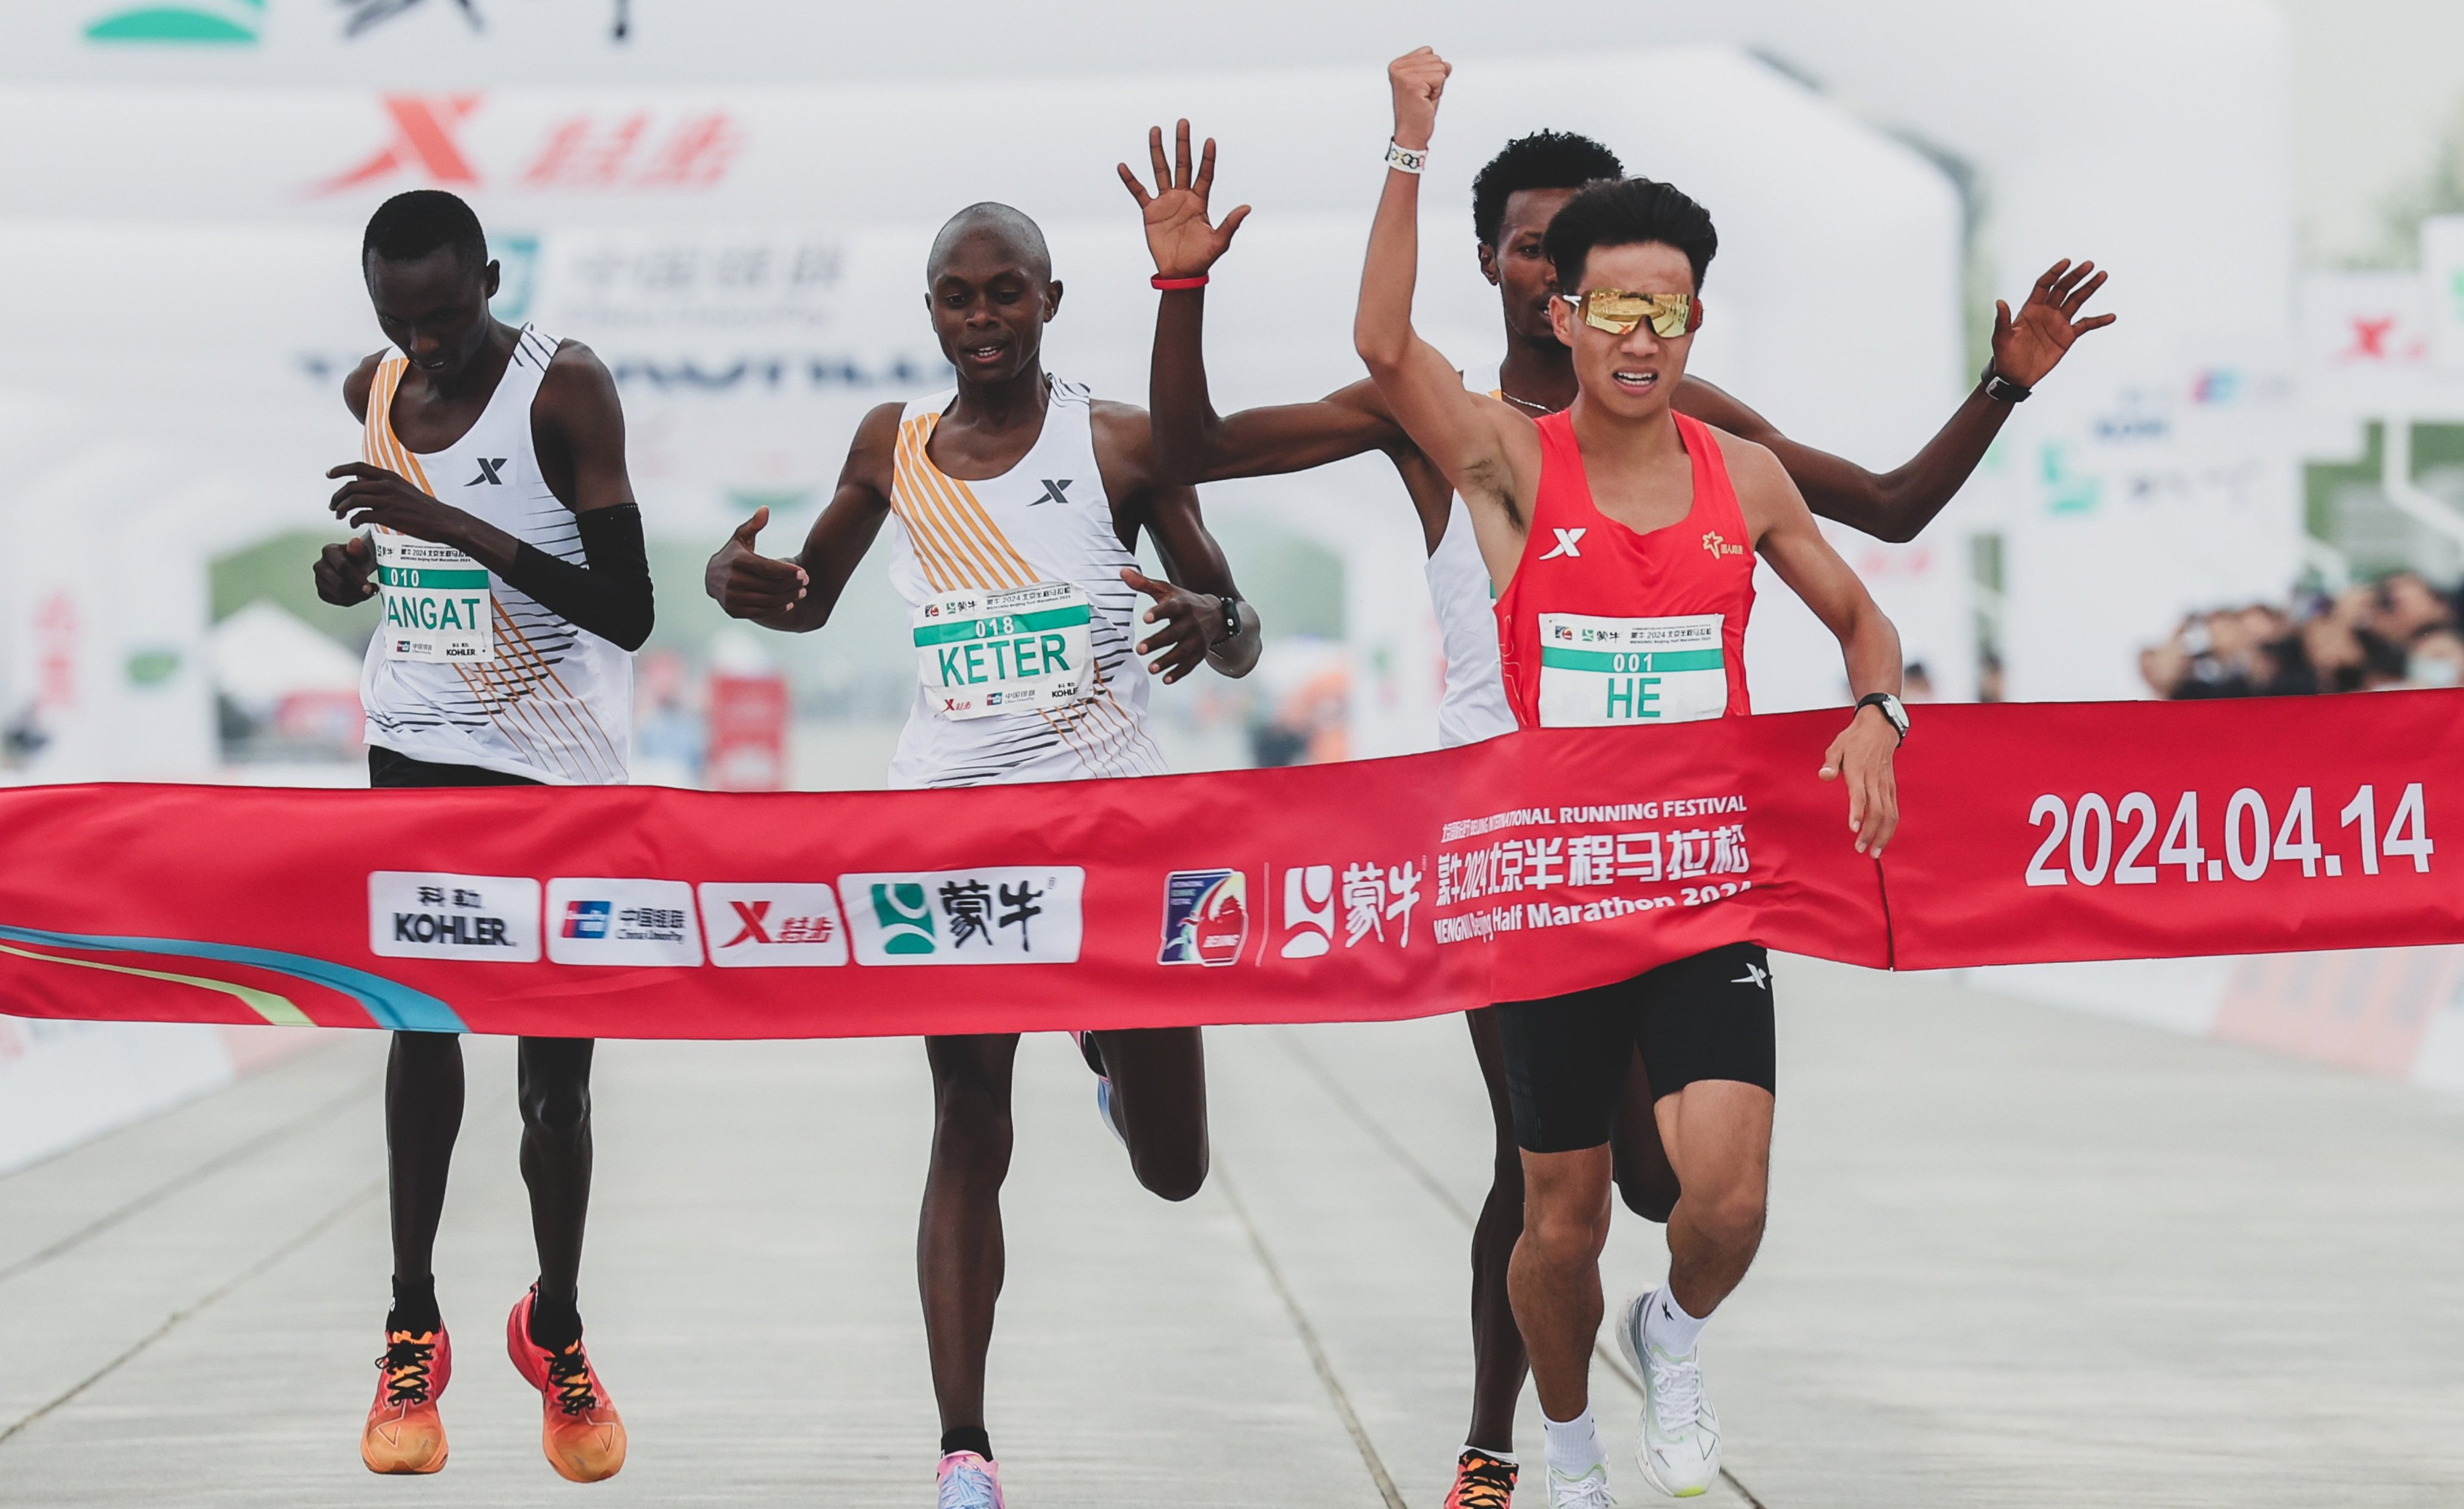 The leading runners appear to let China’s He Jie win the Beijing Half Marathon on Sunday. Photo: Weibo